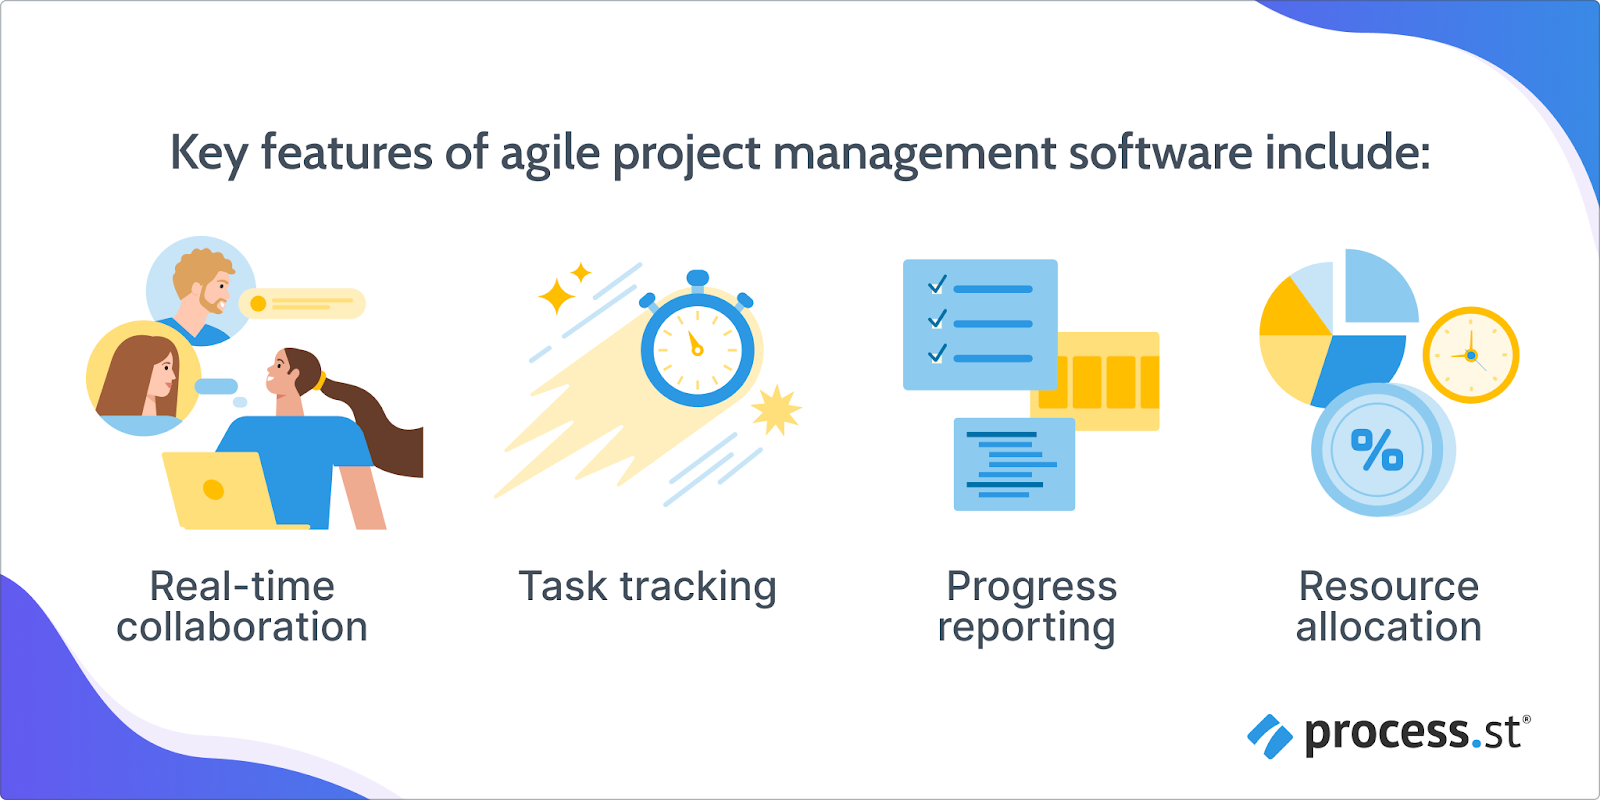 image showing the key features of agile project management software